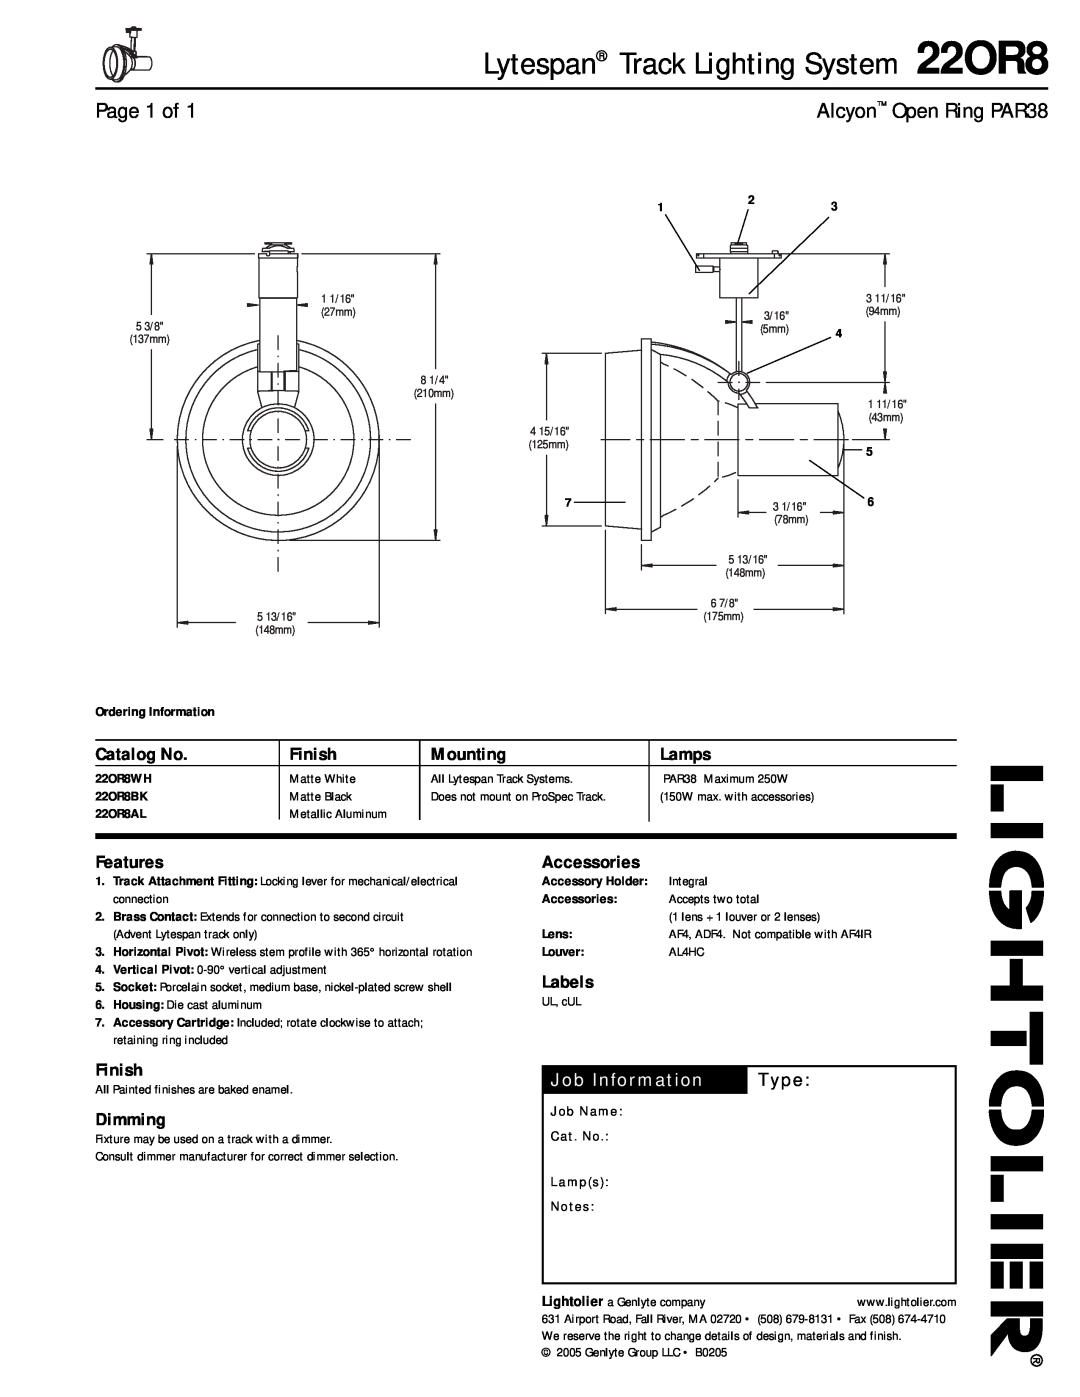 Lightolier 22OR8 manual Alcyon Open Ring PAR38, Catalog No, Finish, Mounting, Lamps, Features, Labels, Dimming, Type 